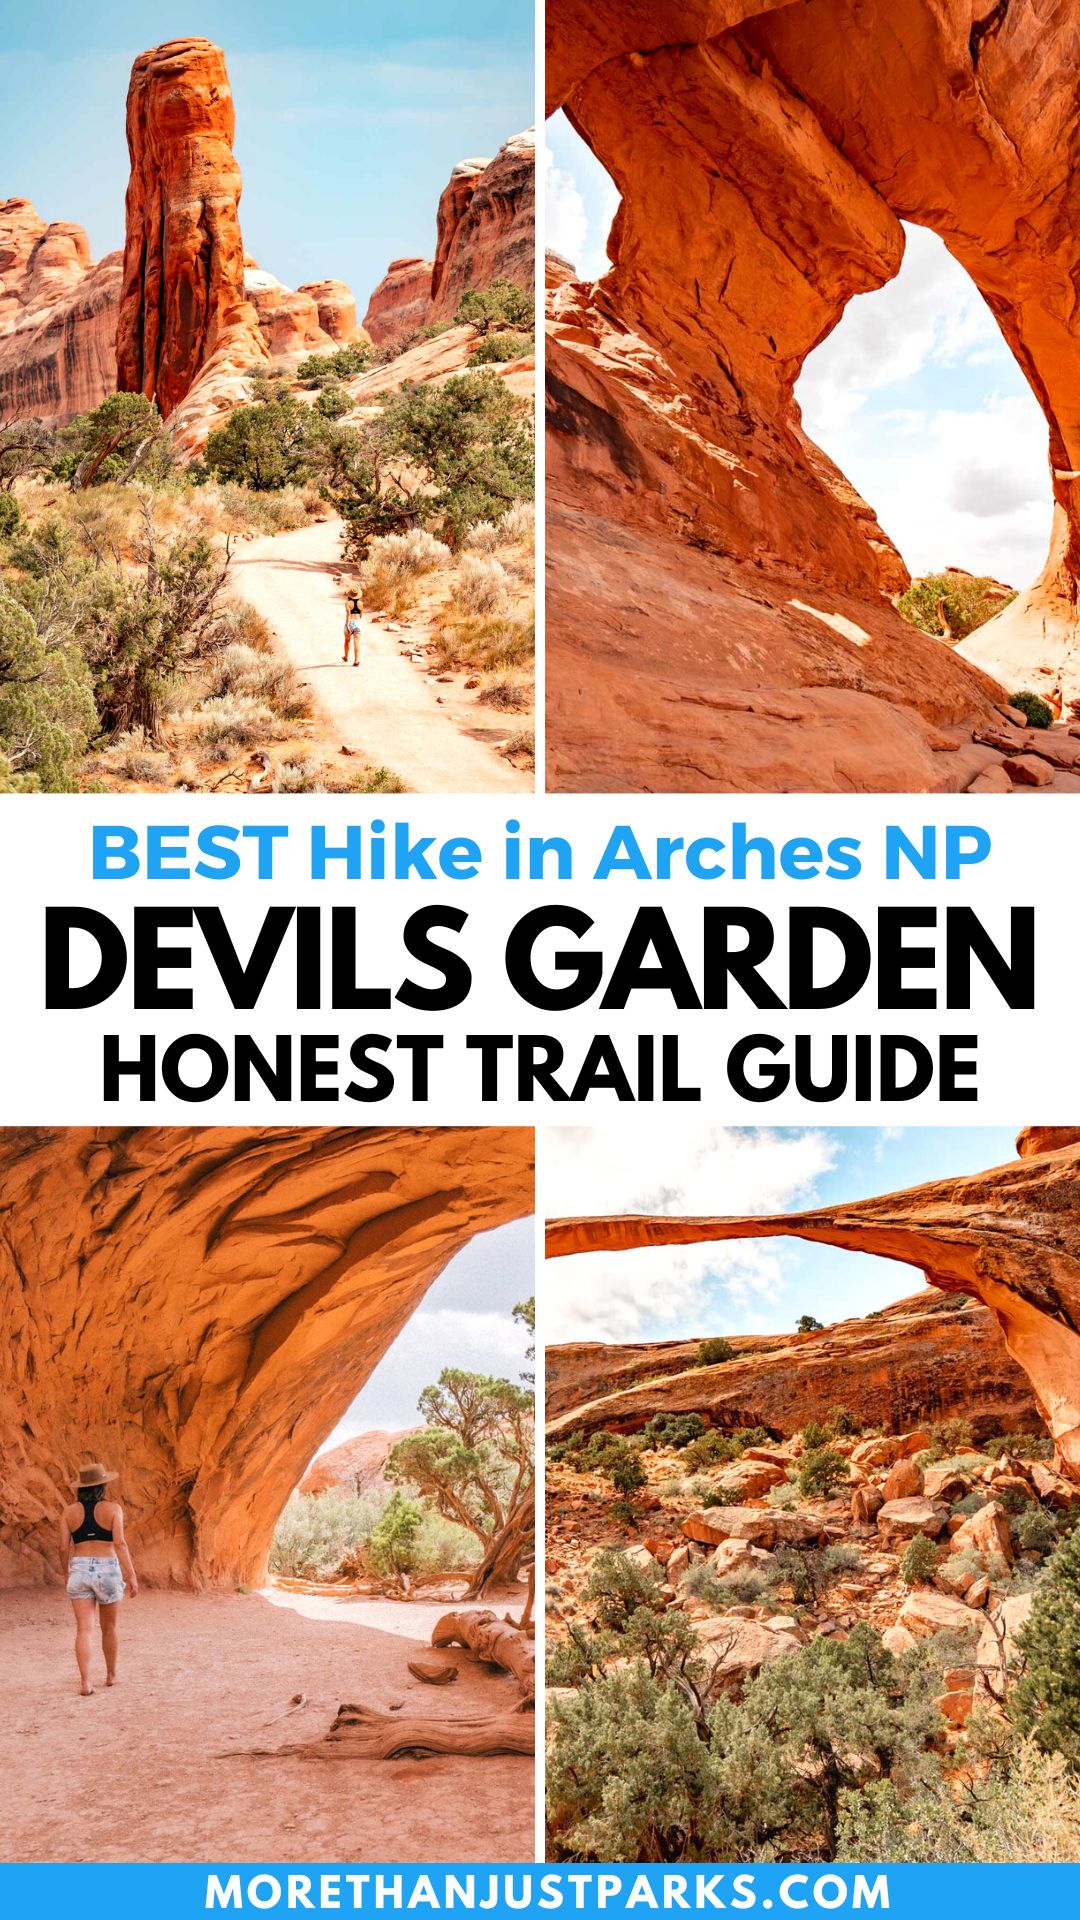 Graphic reads "Best Hike in Arches National Park, Devil's Garden Honest Trail Guide."